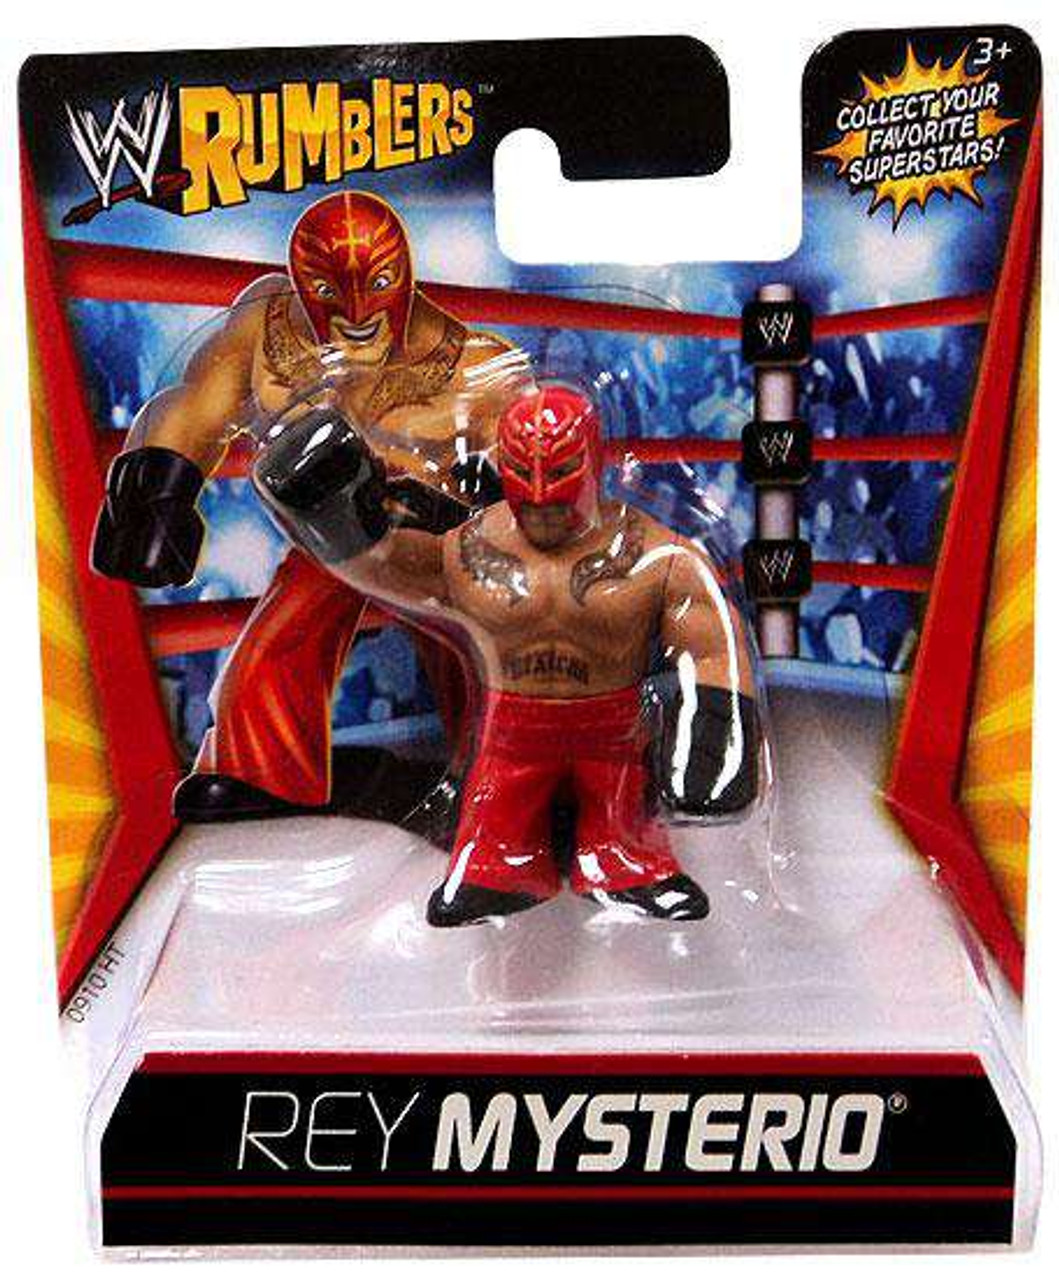 Wwe Wrestling Rumblers Series 1 Rey Mysterio Mini Figure Red Outfit Damaged Package Mattel Toys Toywiz - john cena wrestlemania 21 attire updated roblox